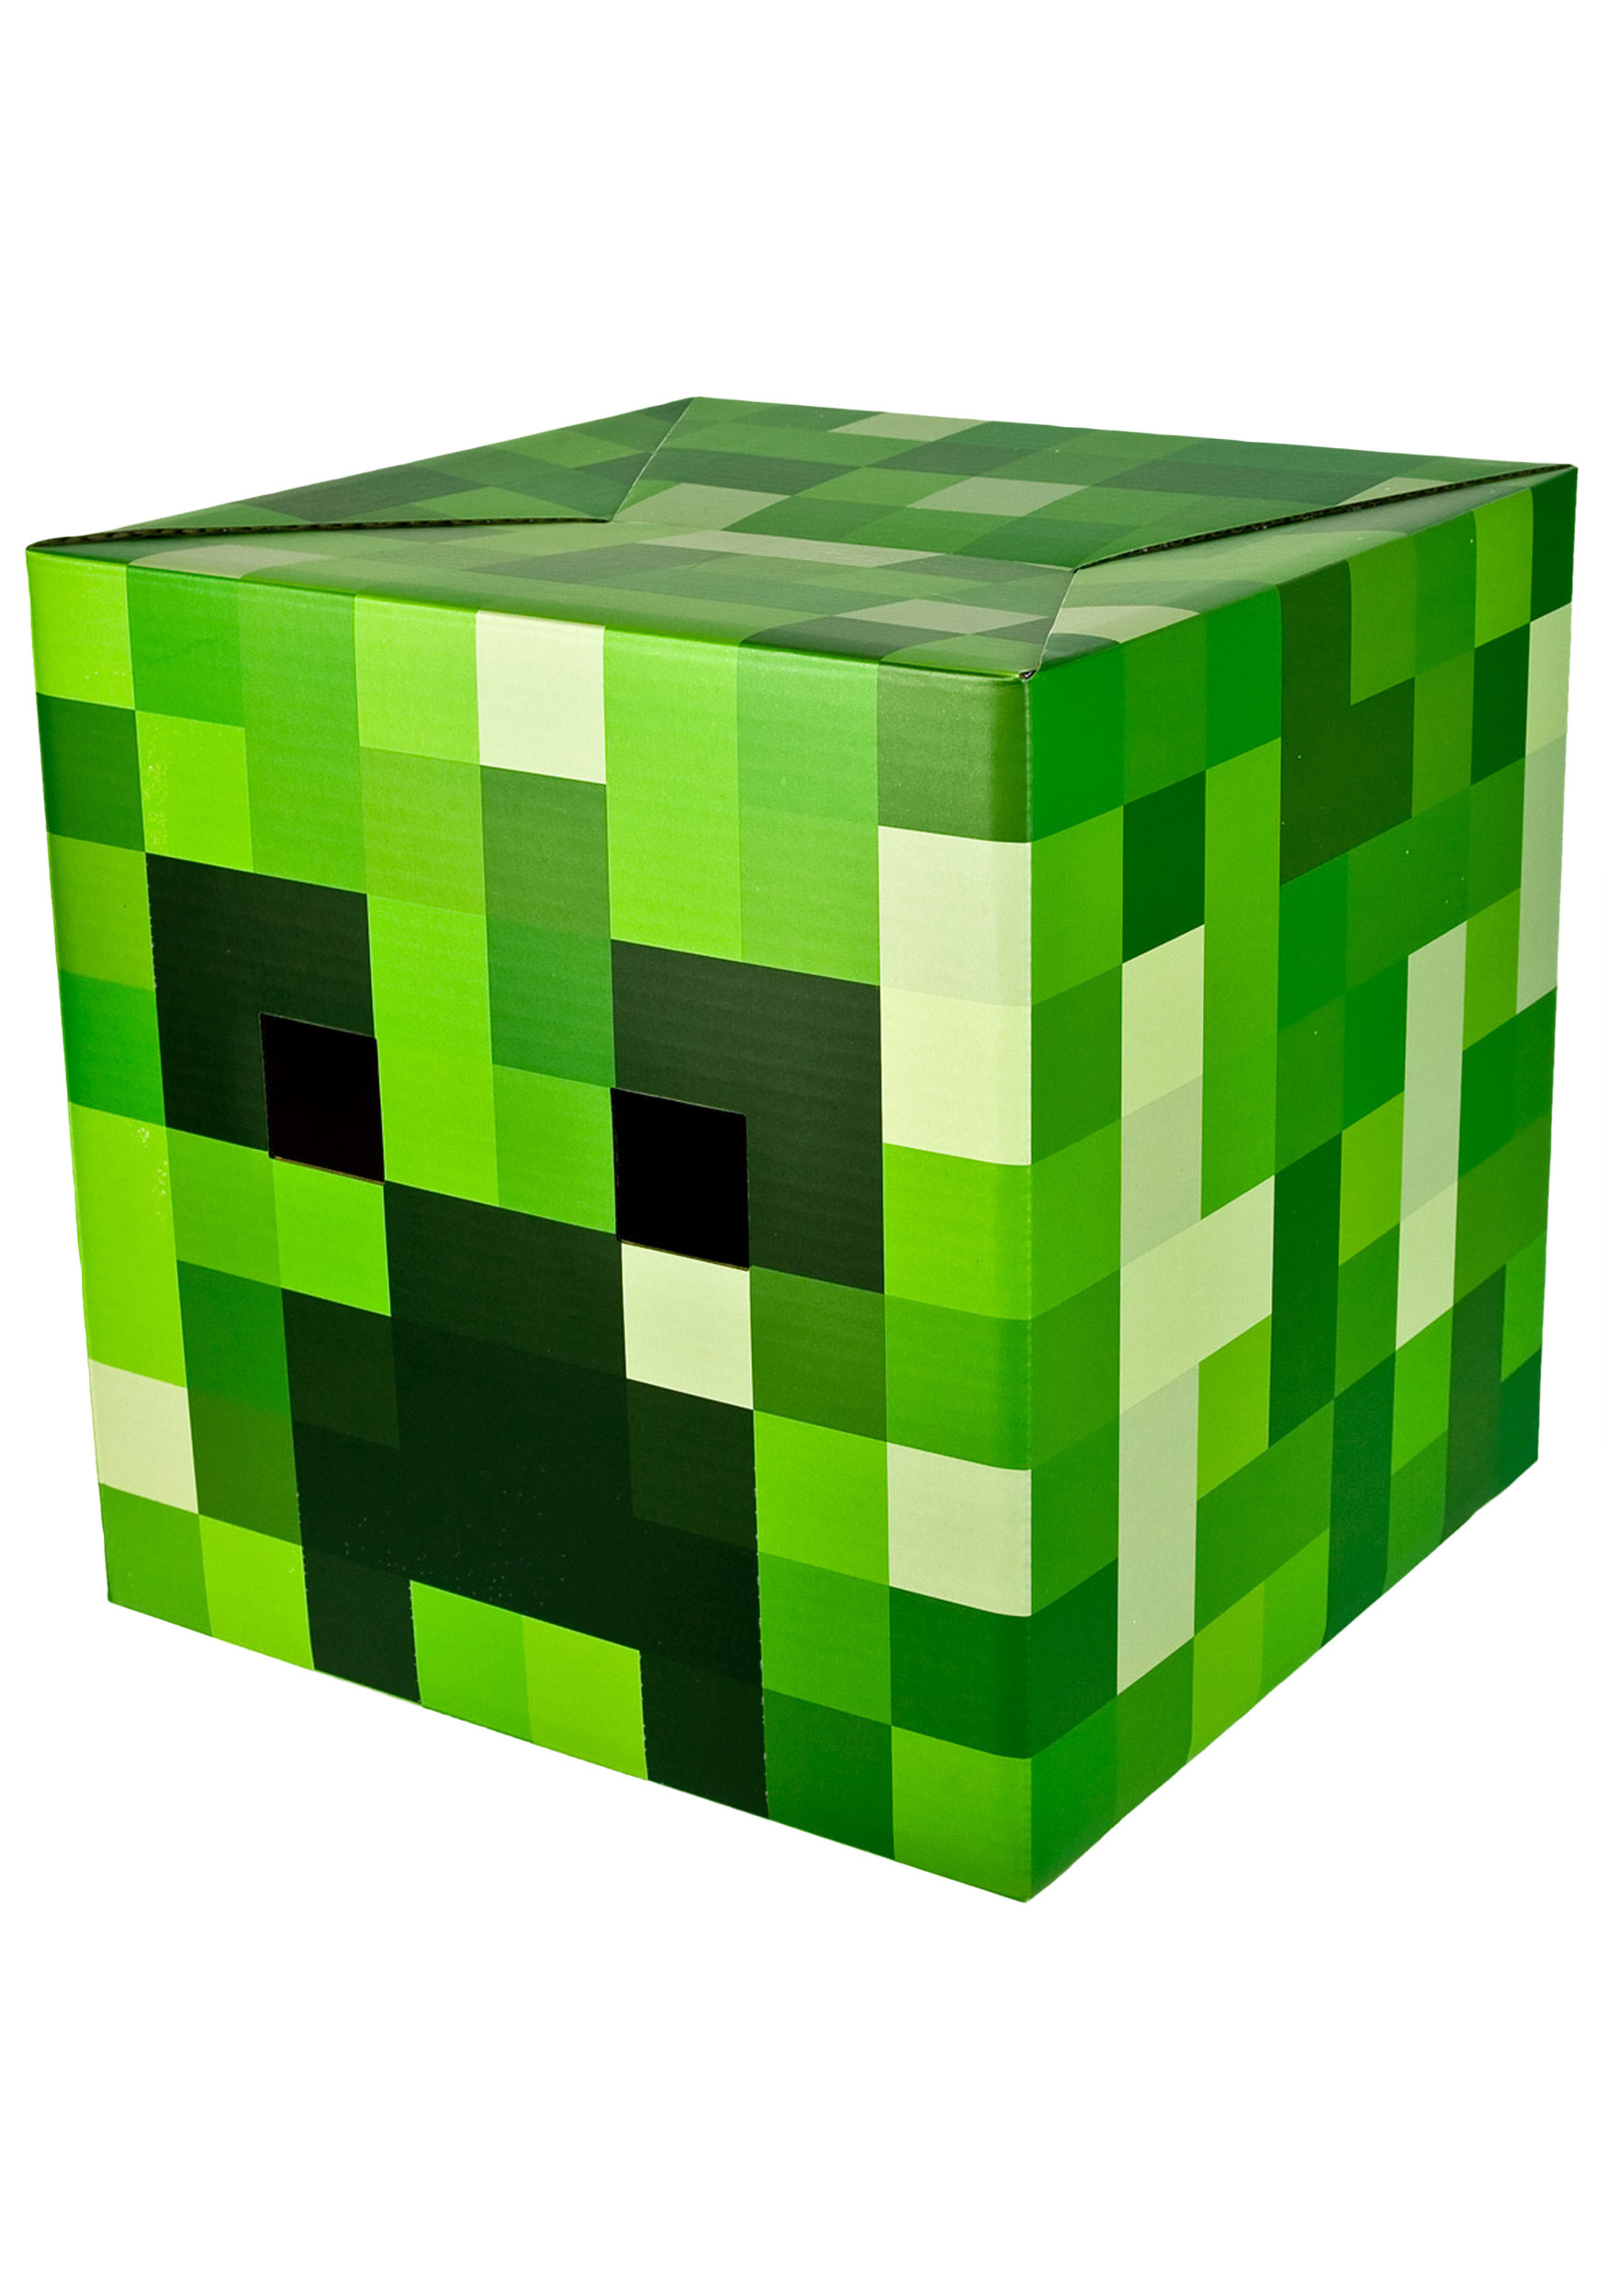 1750x2500 The Minecraft creeper images Creeper HD wallpaper and background photos